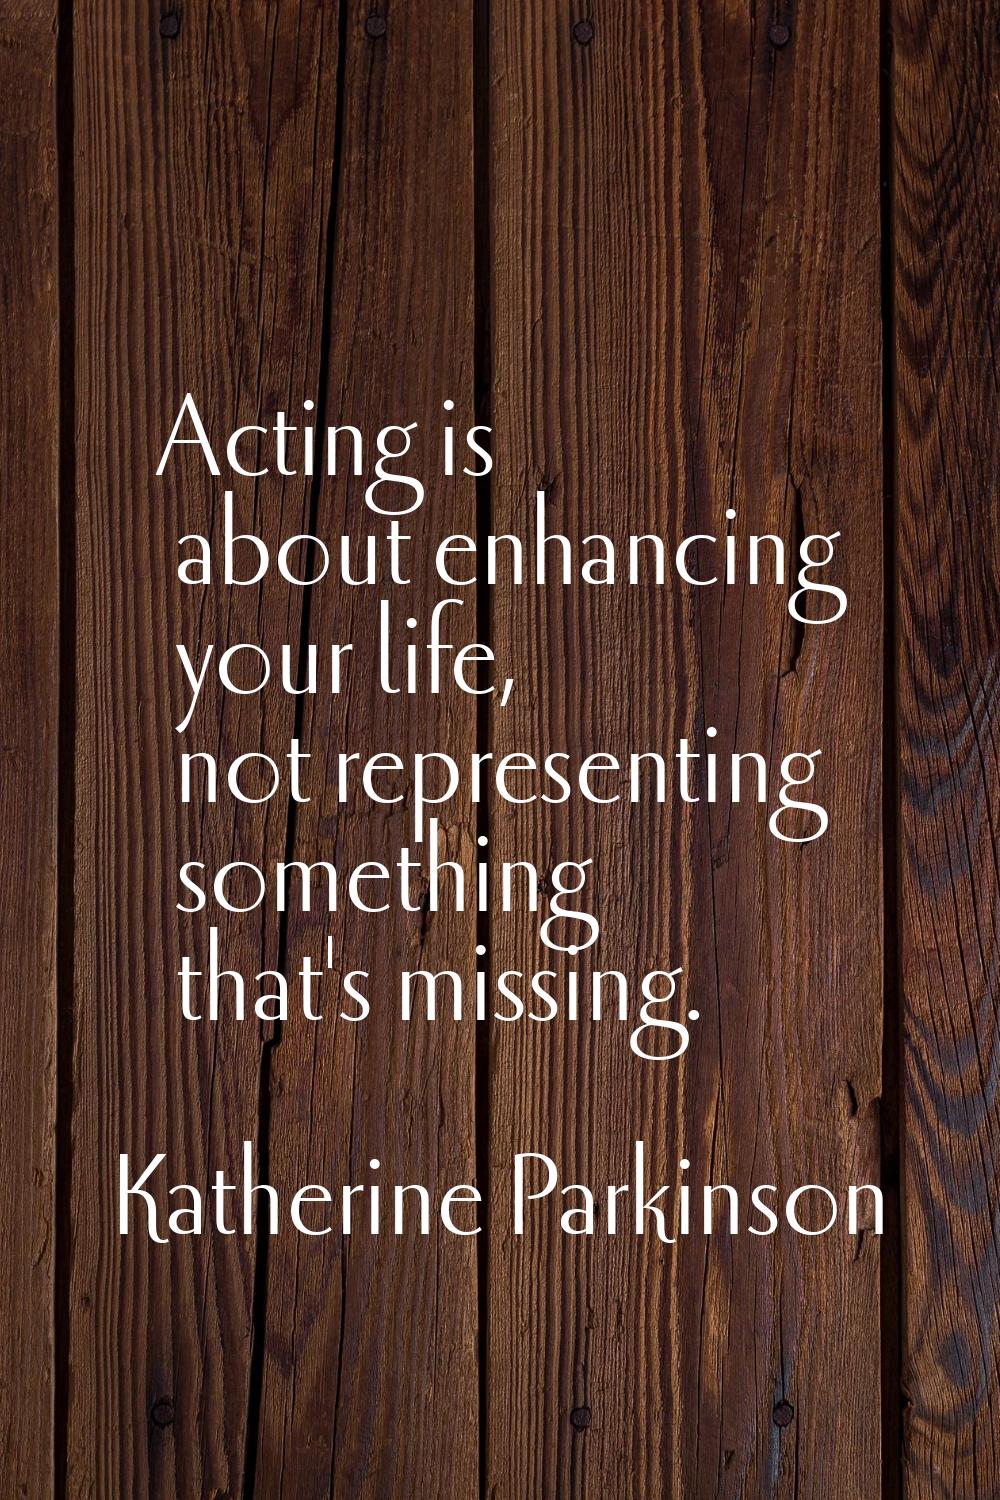 Acting is about enhancing your life, not representing something that's missing.